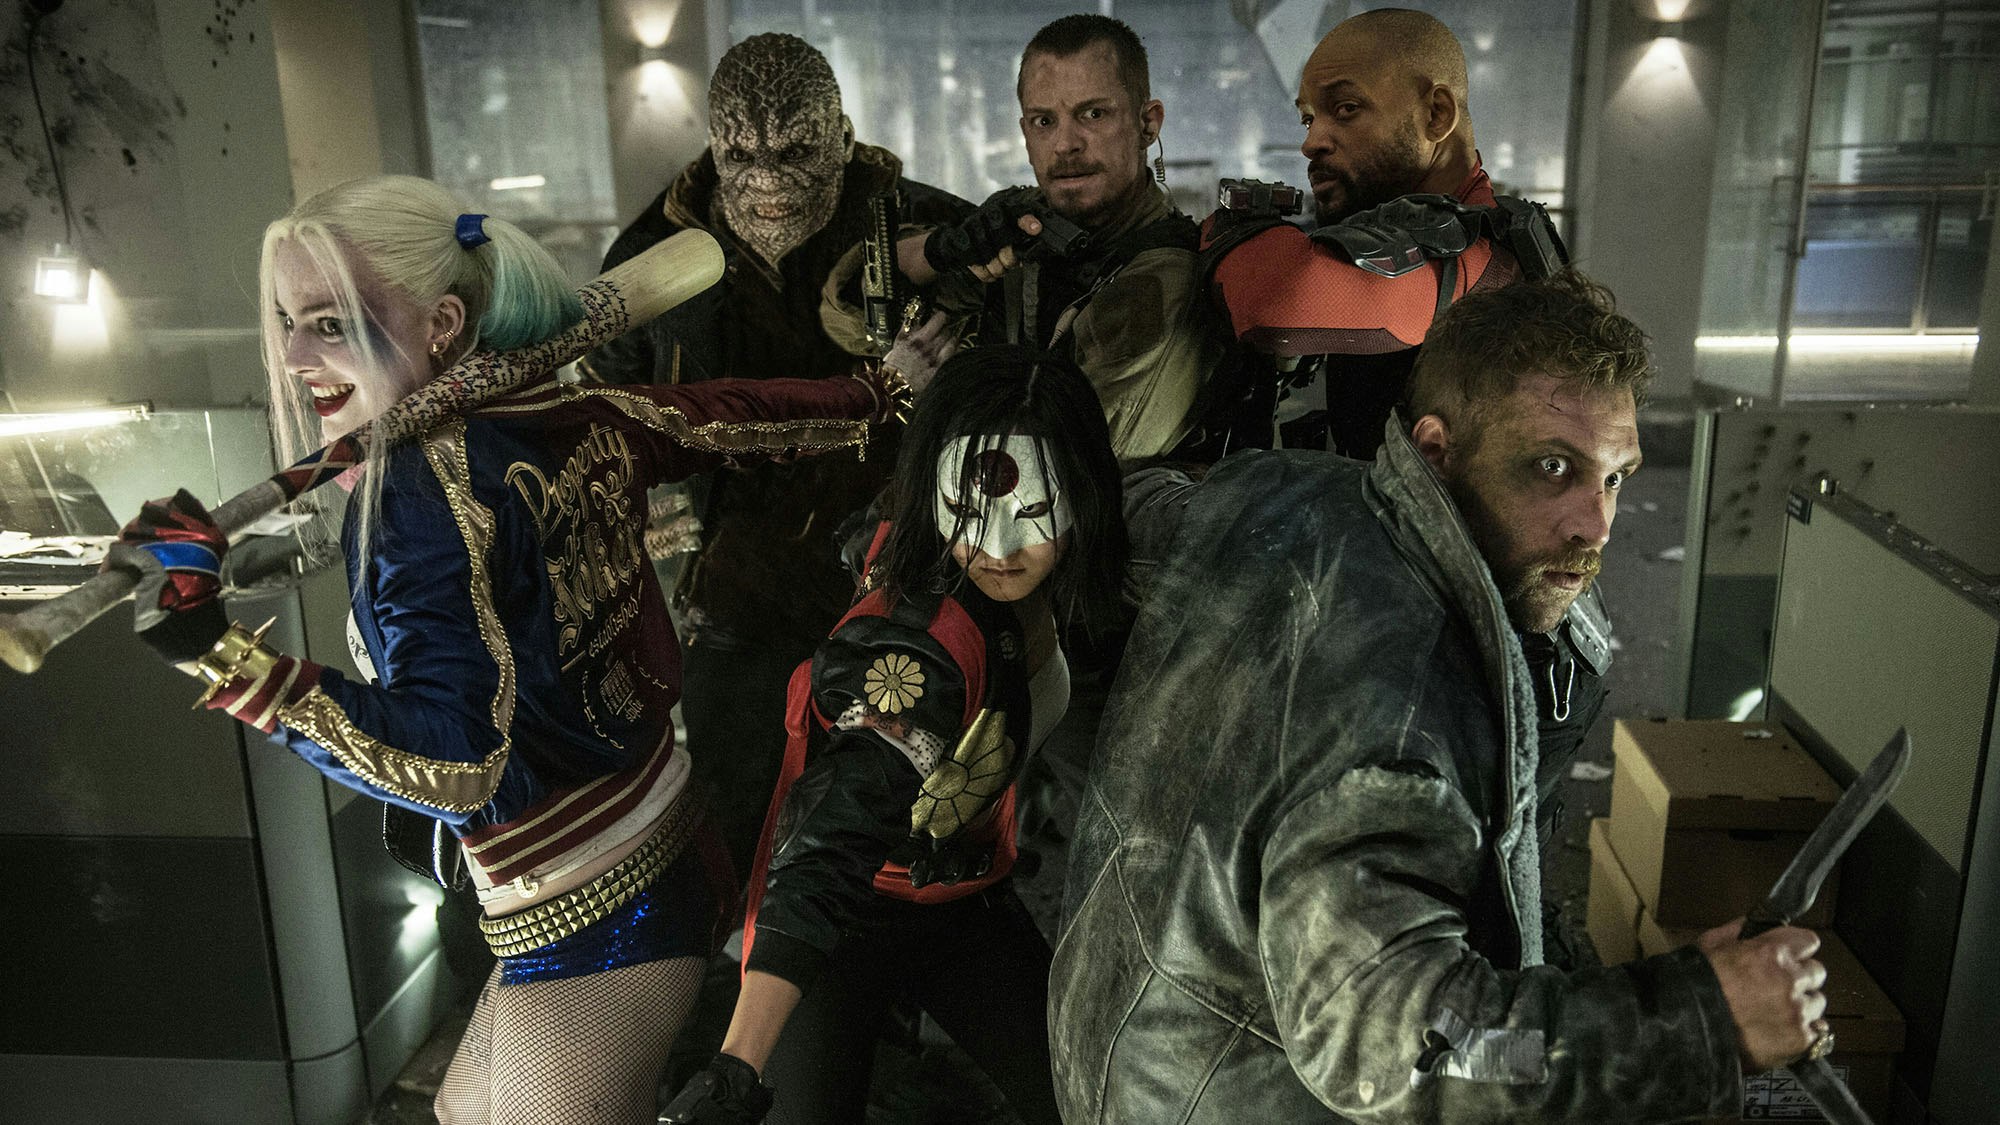 Get to know the faces of the 'Suicide Squad' - Los Angeles Times